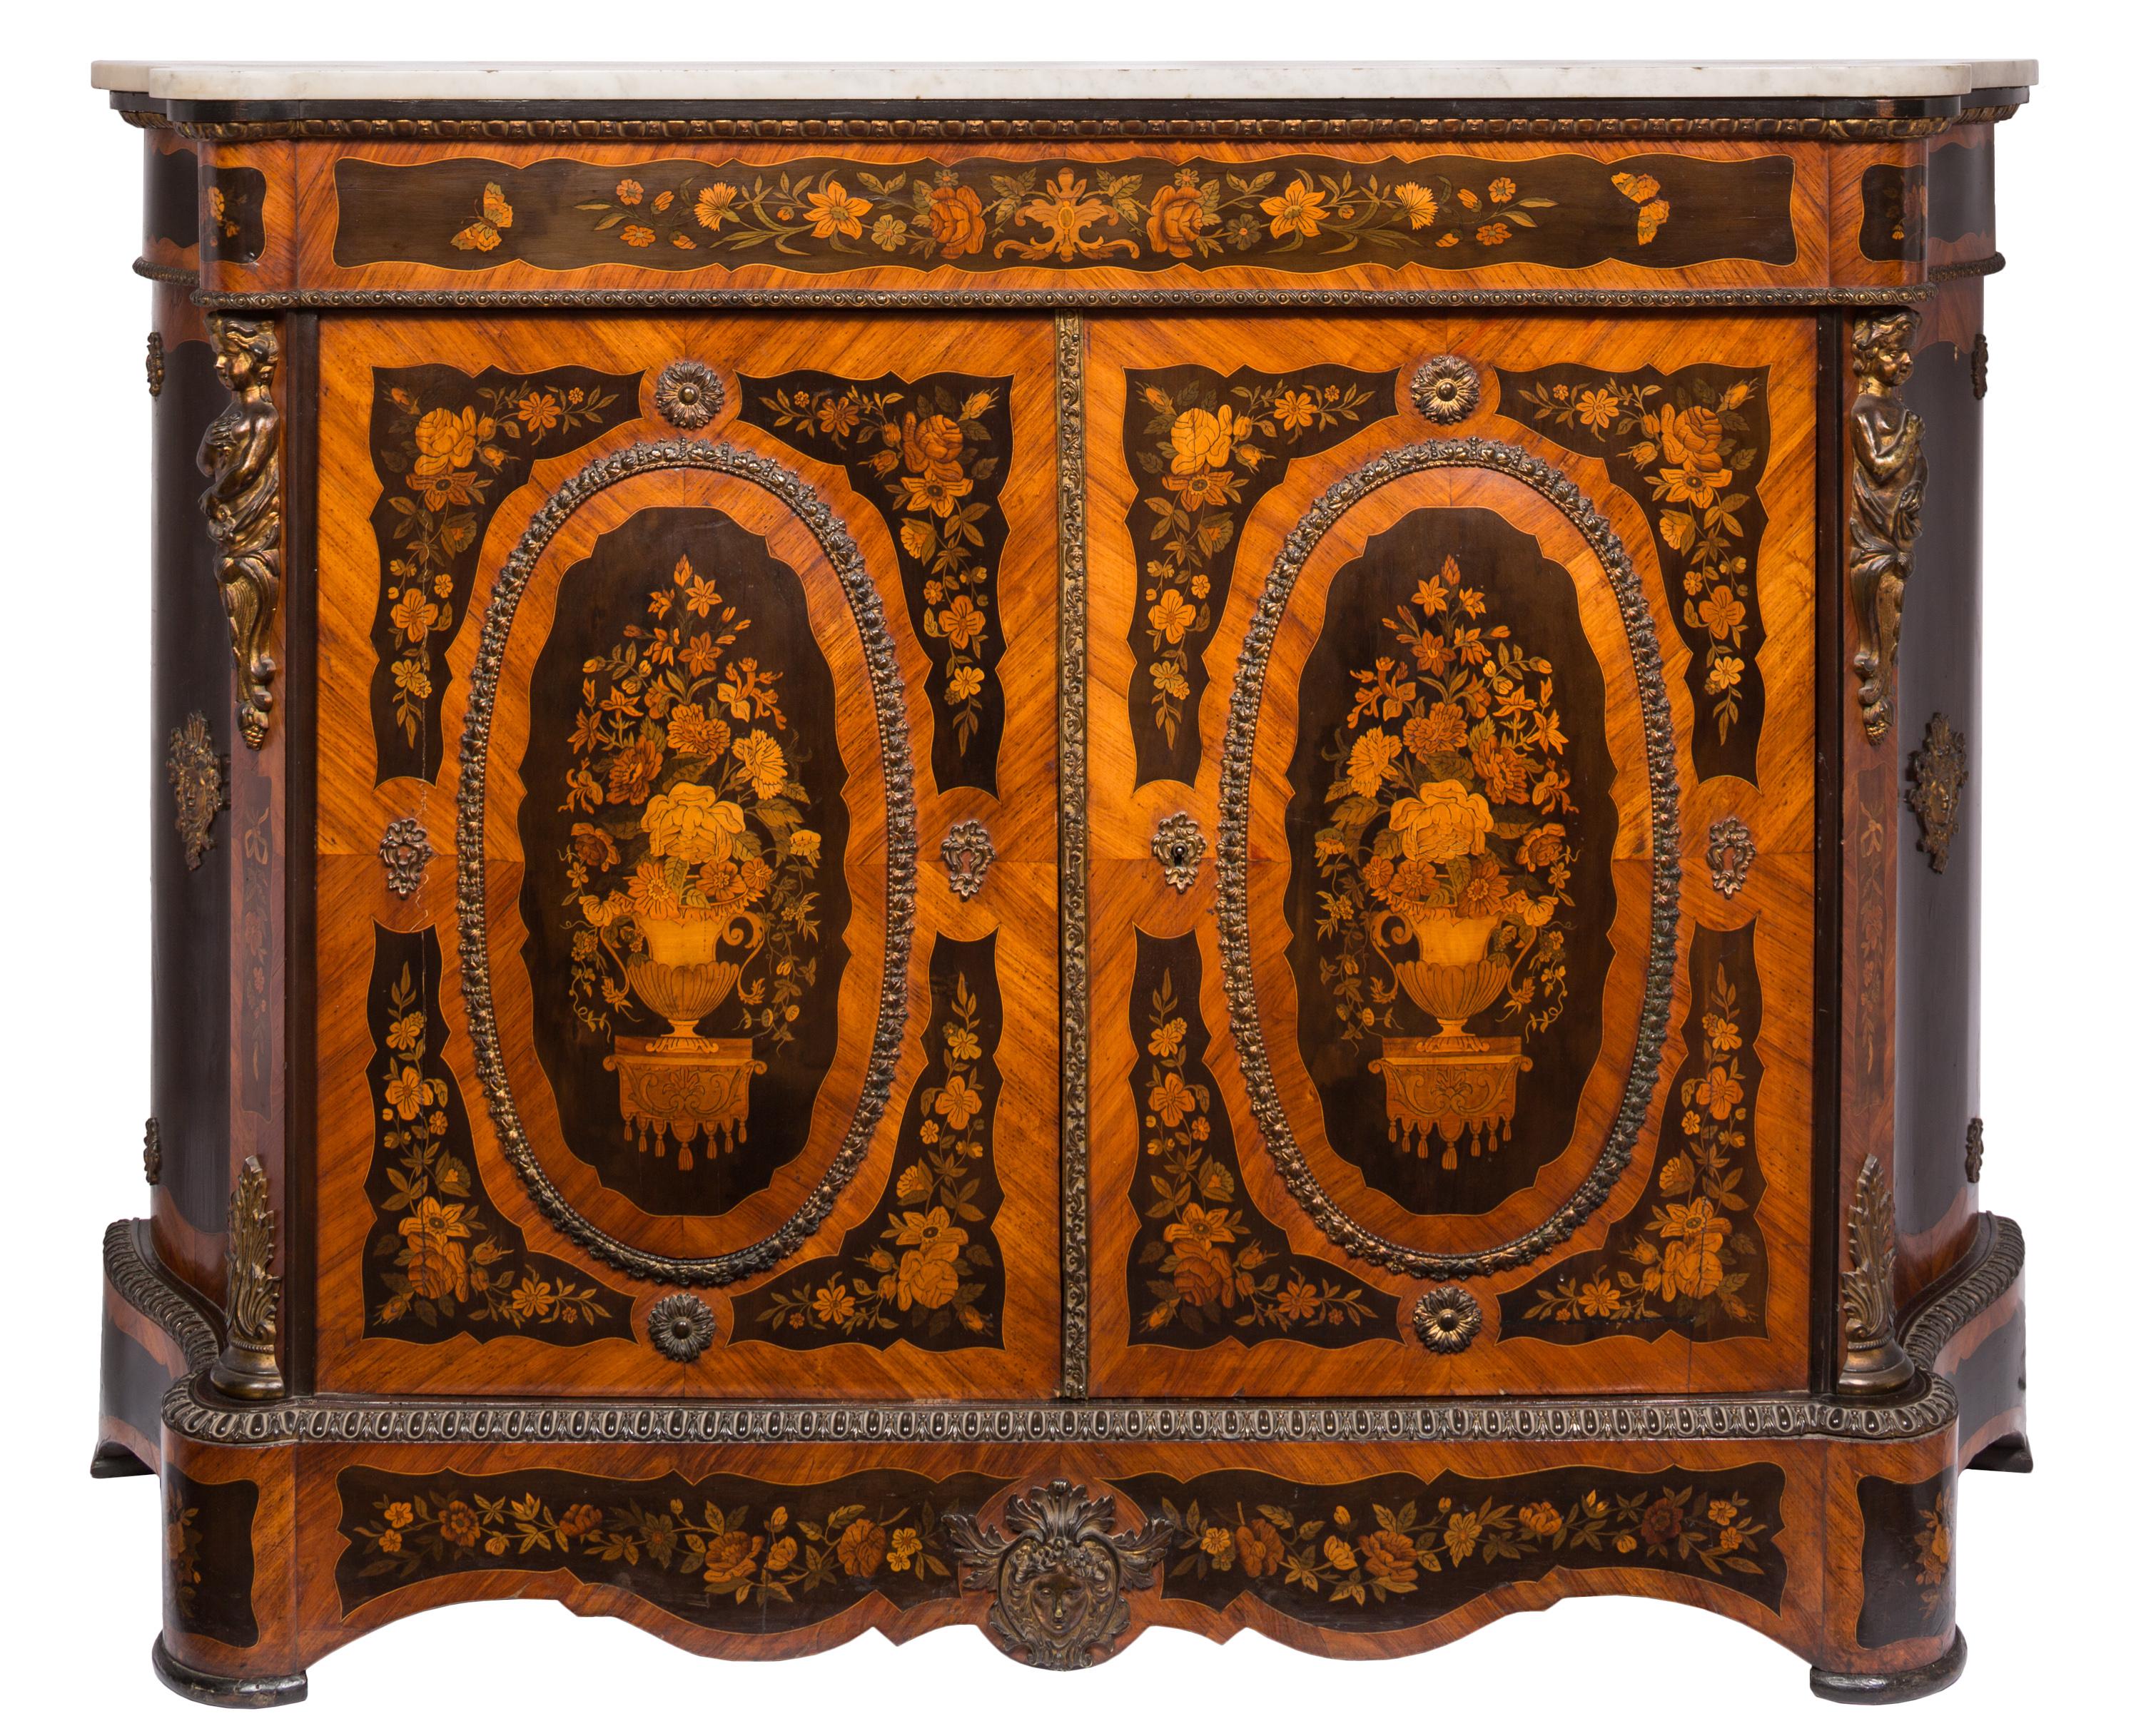 A matched pair of 19th century French Louis XVI style double door side cabinets with intricate multi-wood floral motif marquetry and gilt-bronze details. The central oval image area of each door is slightly convex, and the sides of the cabinets are